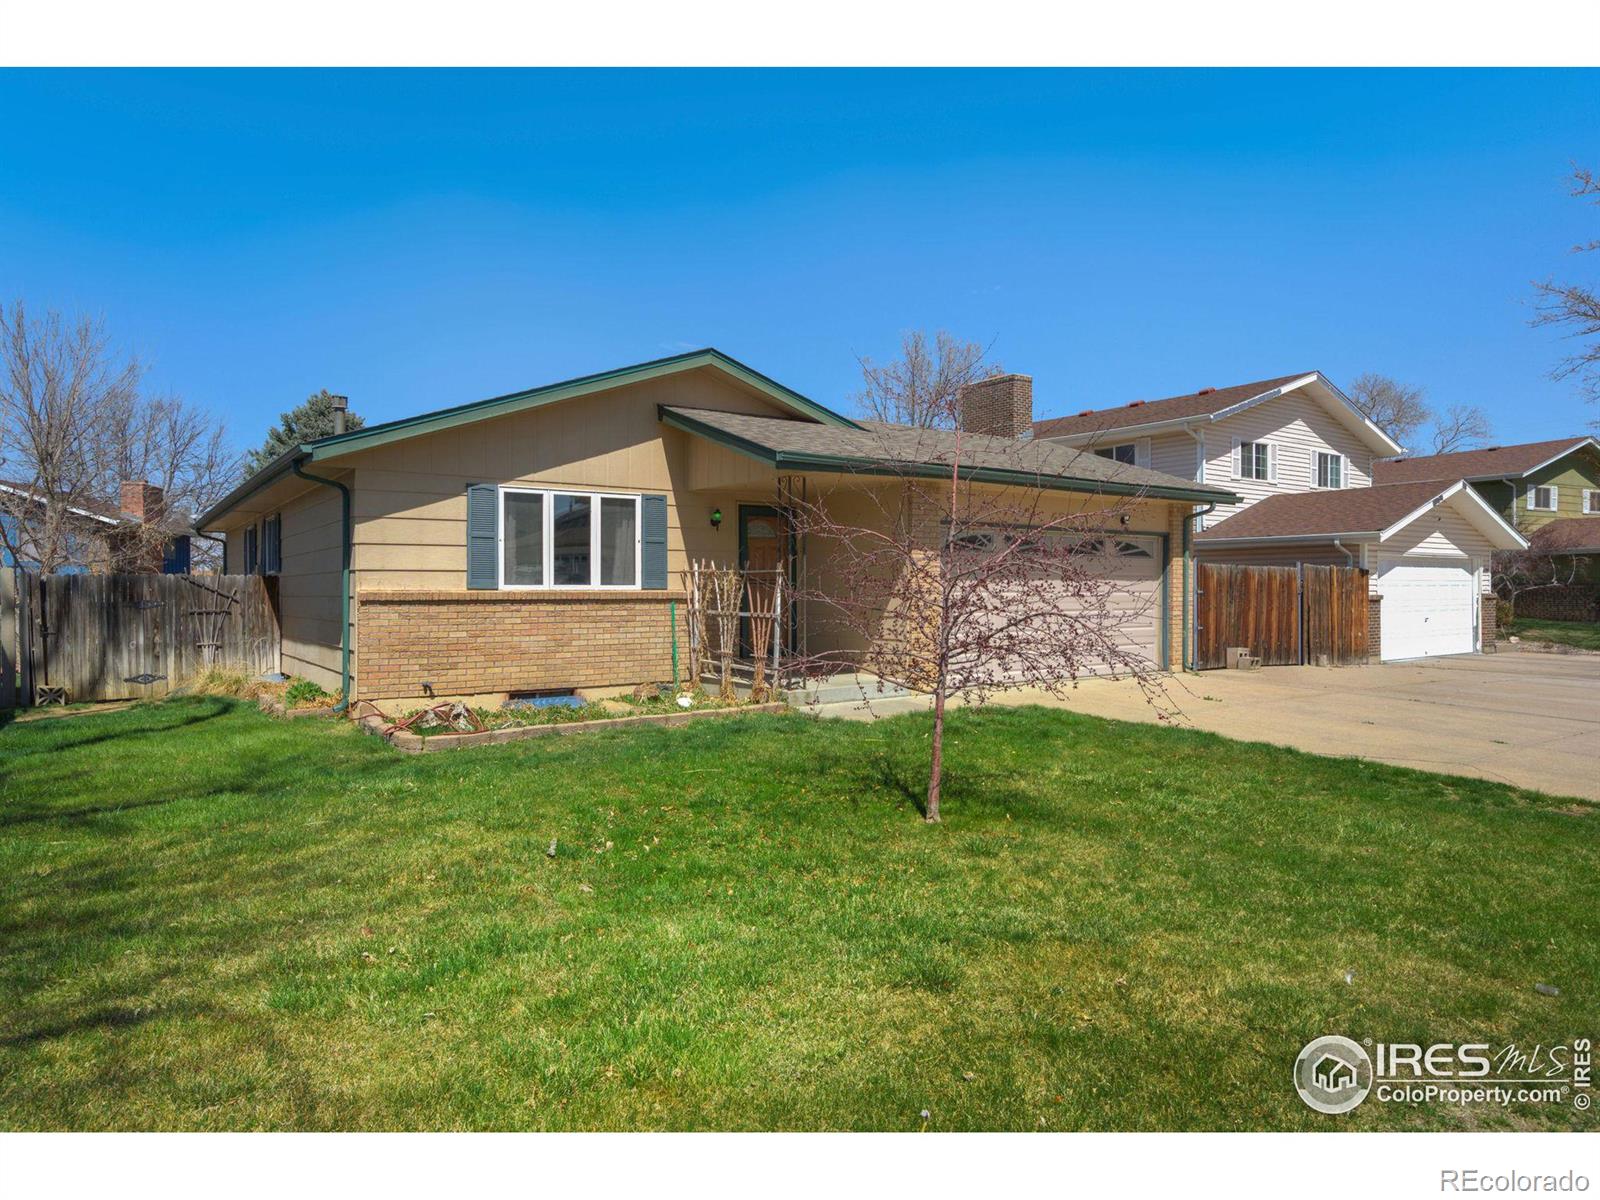 2713 w 19th st rd, greeley sold home. Closed on 2024-04-29 for $400,000.